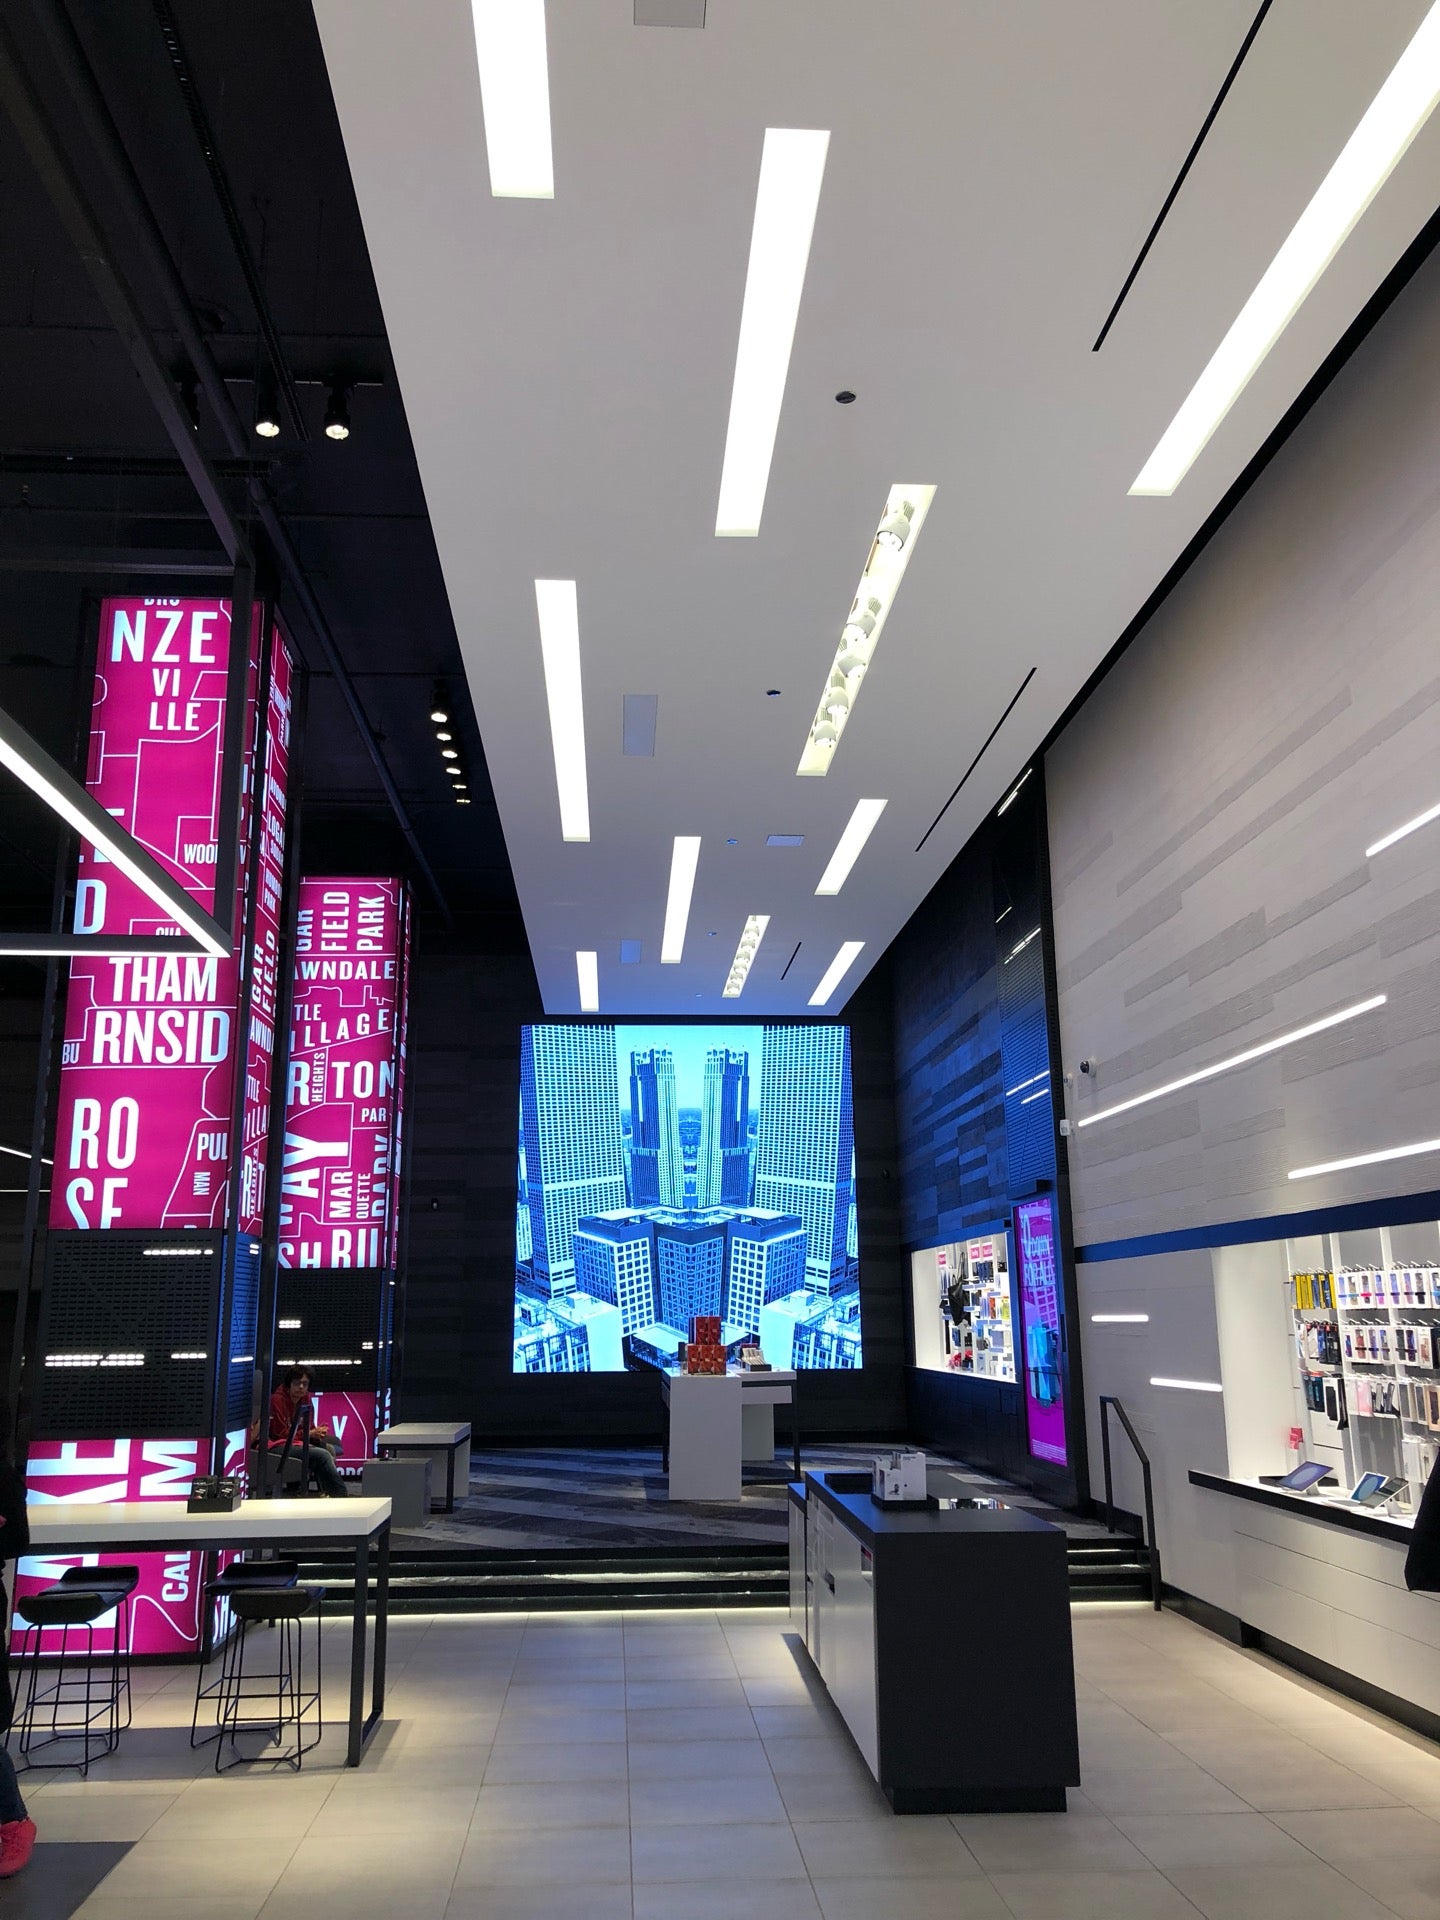 T-Mobile Flagship, Chicago, IL